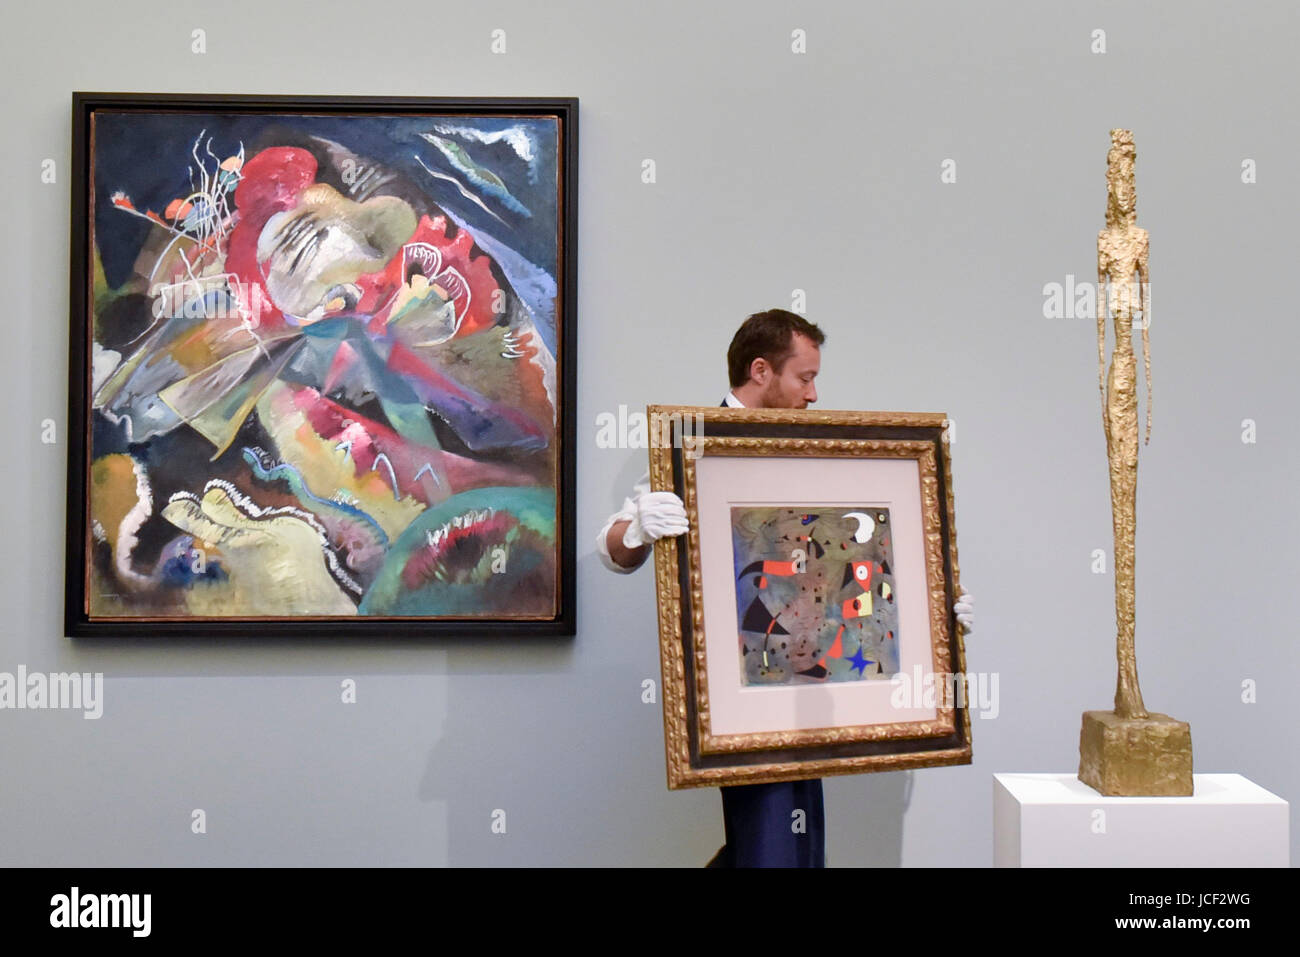 London, UK.  15 June 2017. (L to R) 'Bild mit weissen Linien', 1913, by Wassily Kandinsky (estimate on request), 'Femme et oiseaux', 1940, by Joan Miró (estimate on request) and 'Grande figure', 1947, by Alberto Giacometti (estimate GBP15-25m). Preview of Impressionist and Modern art sale, taking place at Sotheby's New Bond Street on 21 June. Credit: Stephen Chung / Alamy Live News Stock Photo